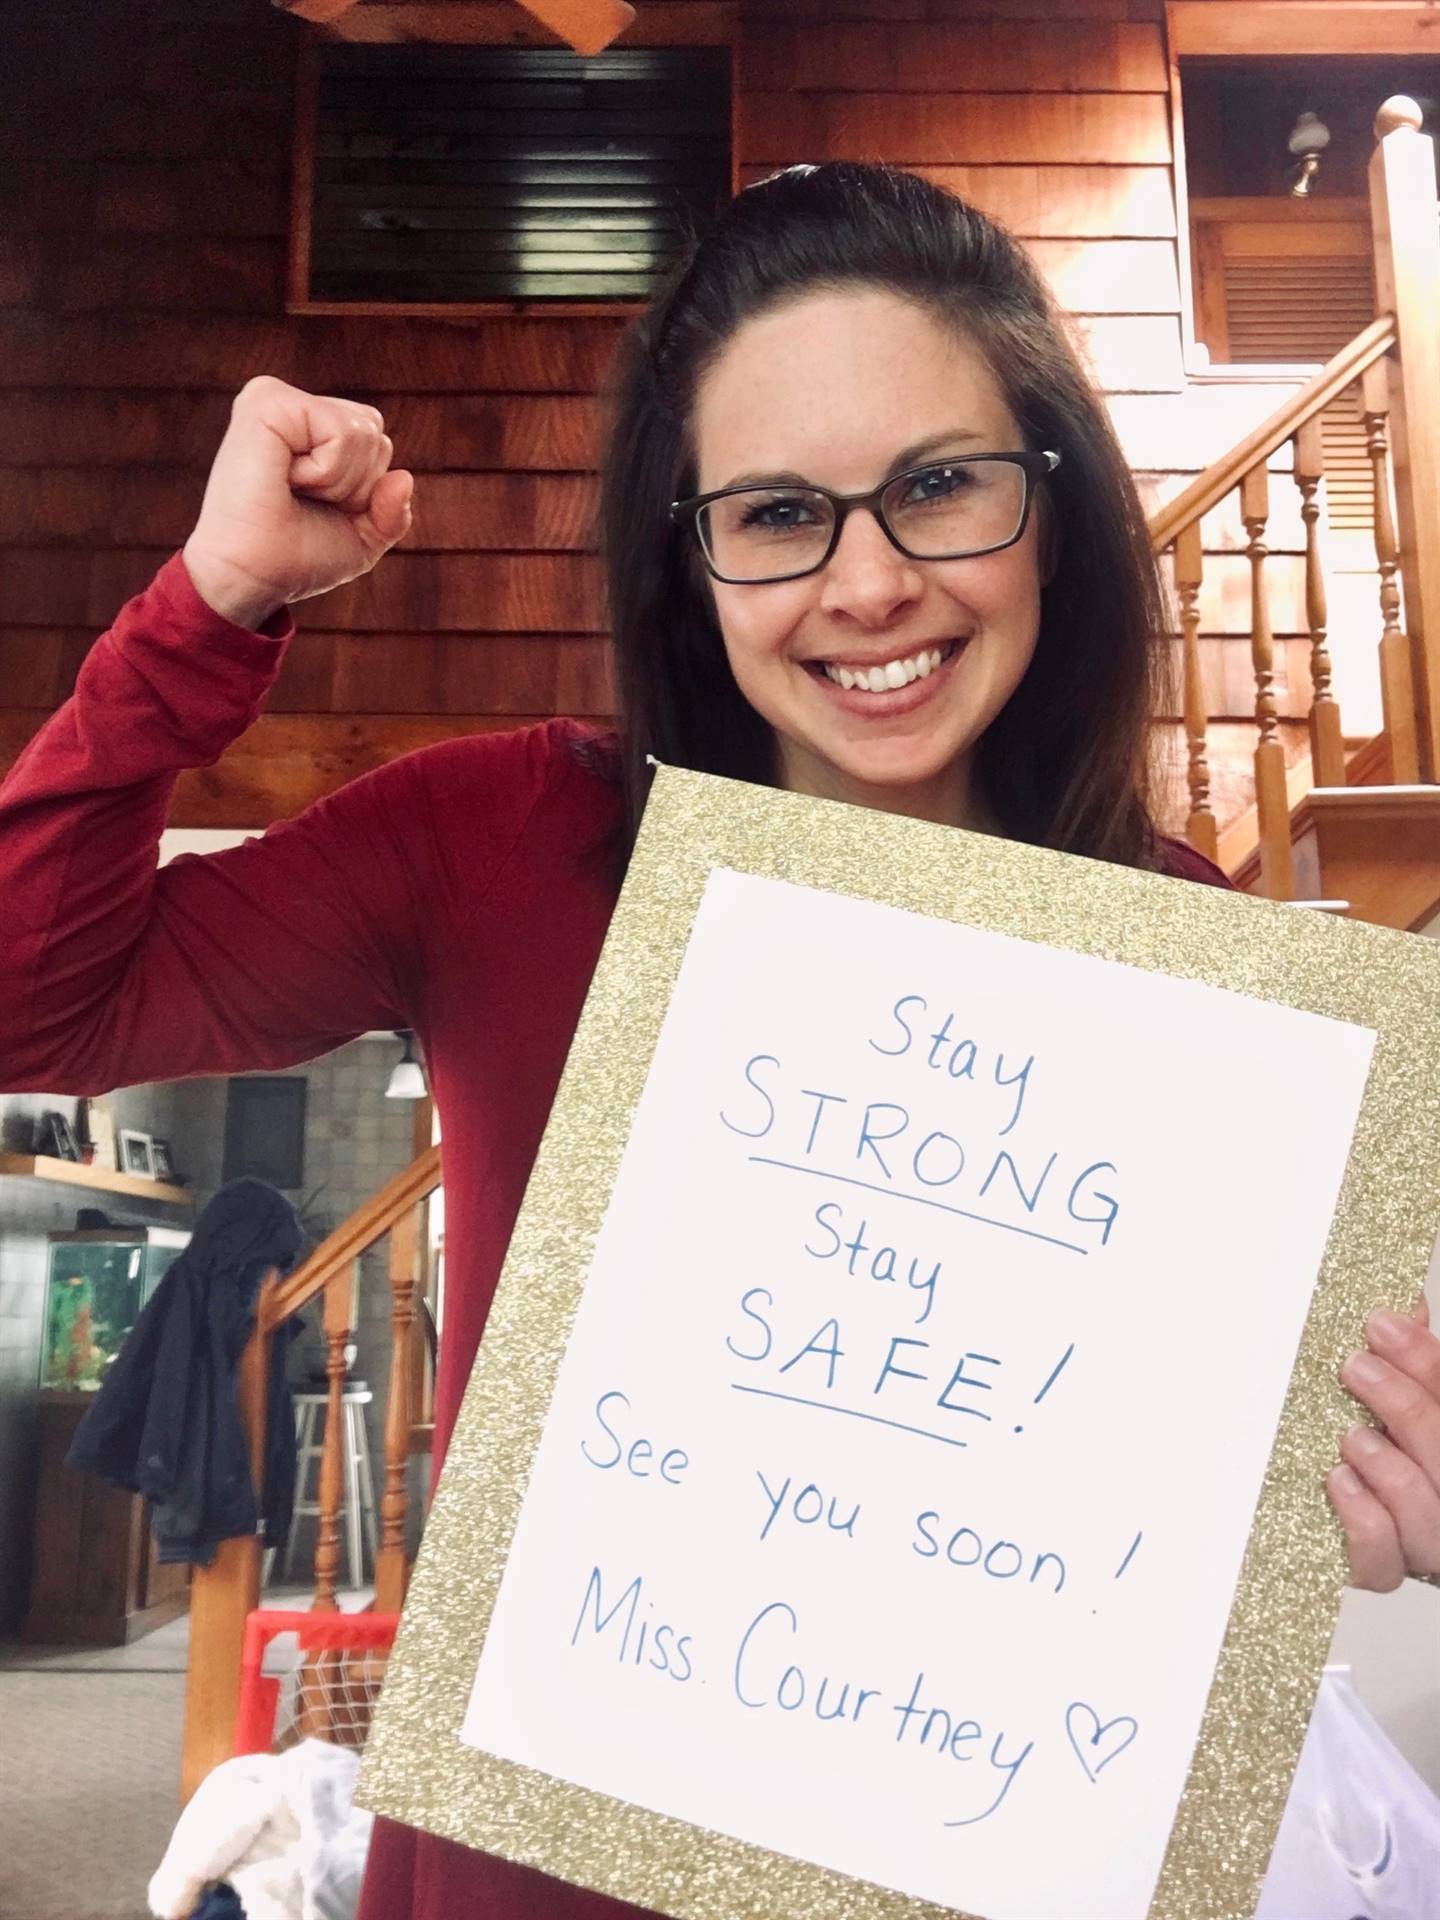 staff member holding up sign "Stay strong stay safe"